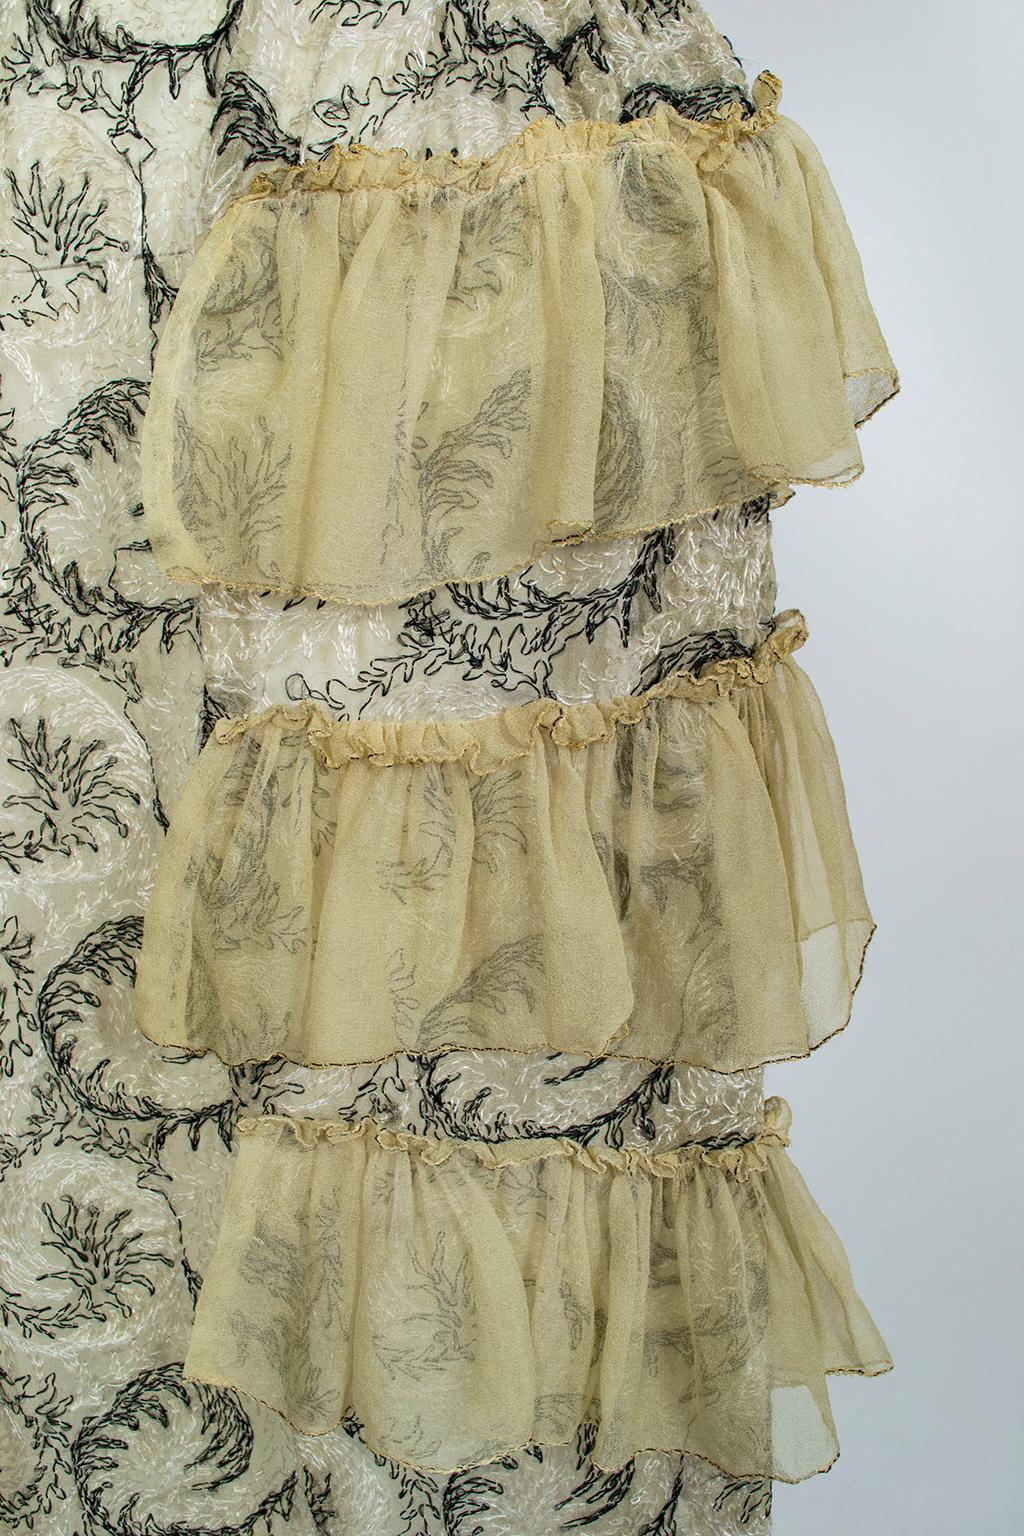 Chartreuse Edwardian Chiffon Robe de Style with Scrolling Embroidery - XS, 1910s For Sale 3